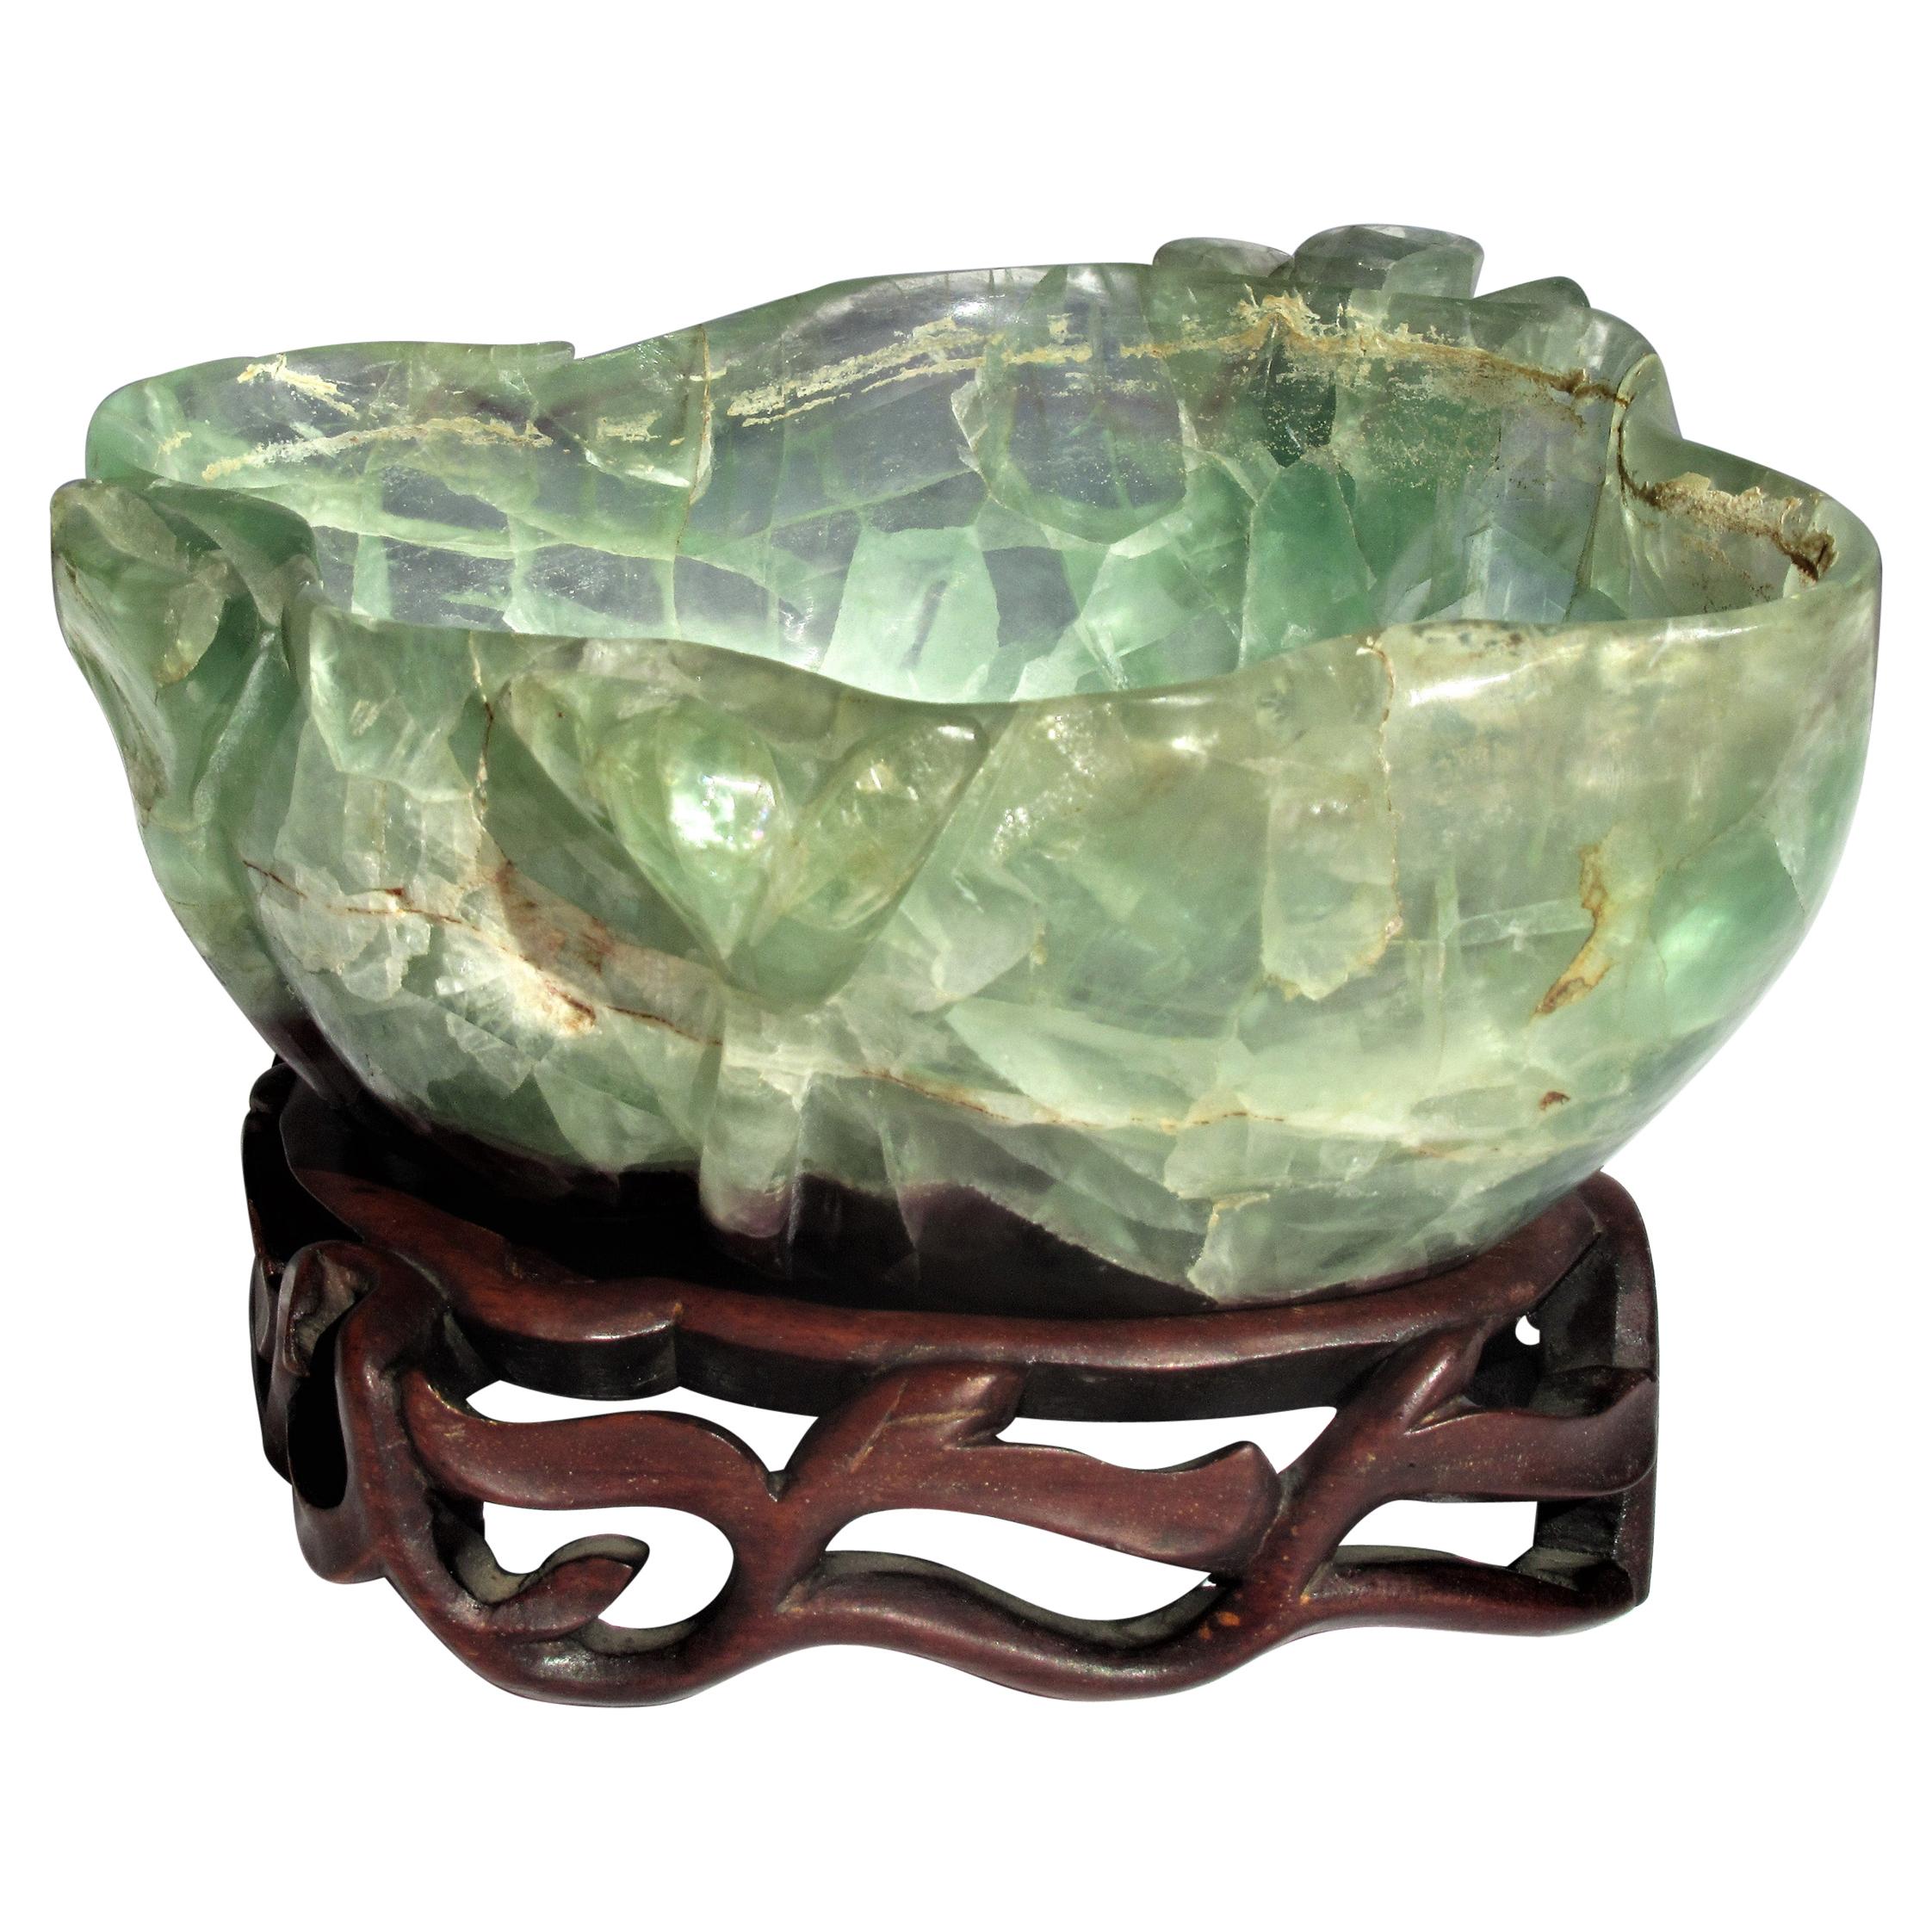 Chinese Qing Dynasty Carved Fluorite Bowl on Stand